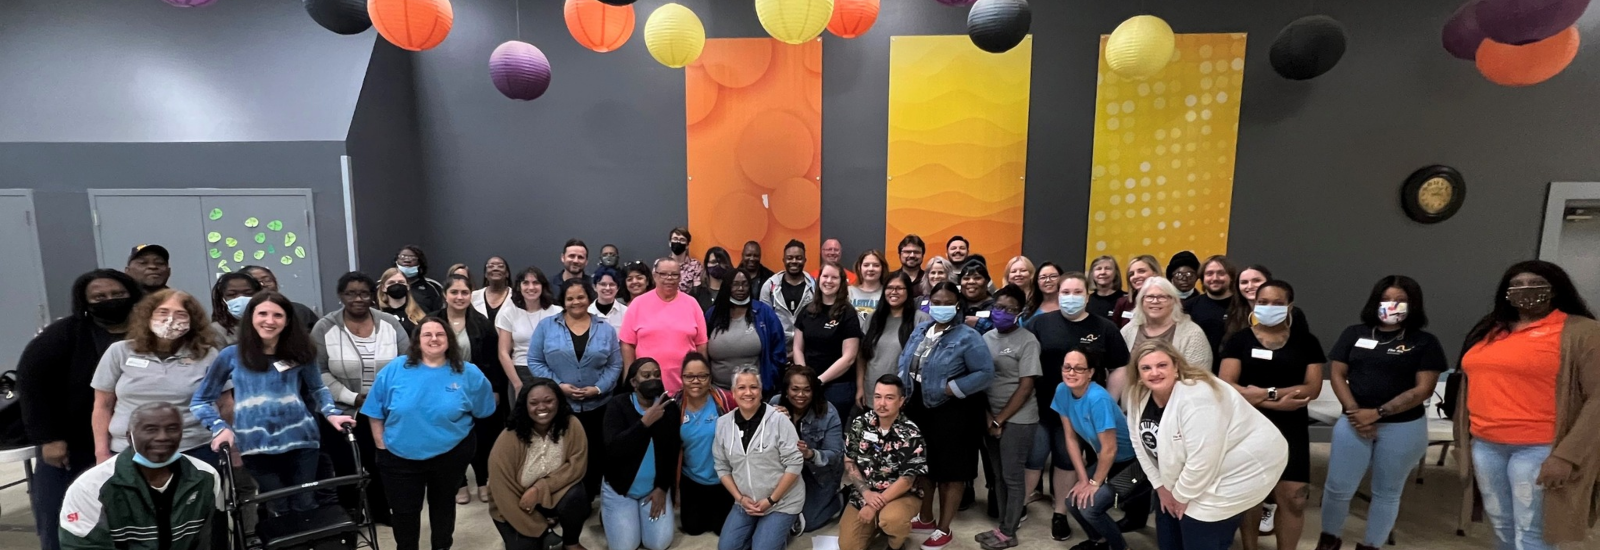 Large group photo of the OCT Arc Jacksonville staff with orange, purple and yellow lanterns above them